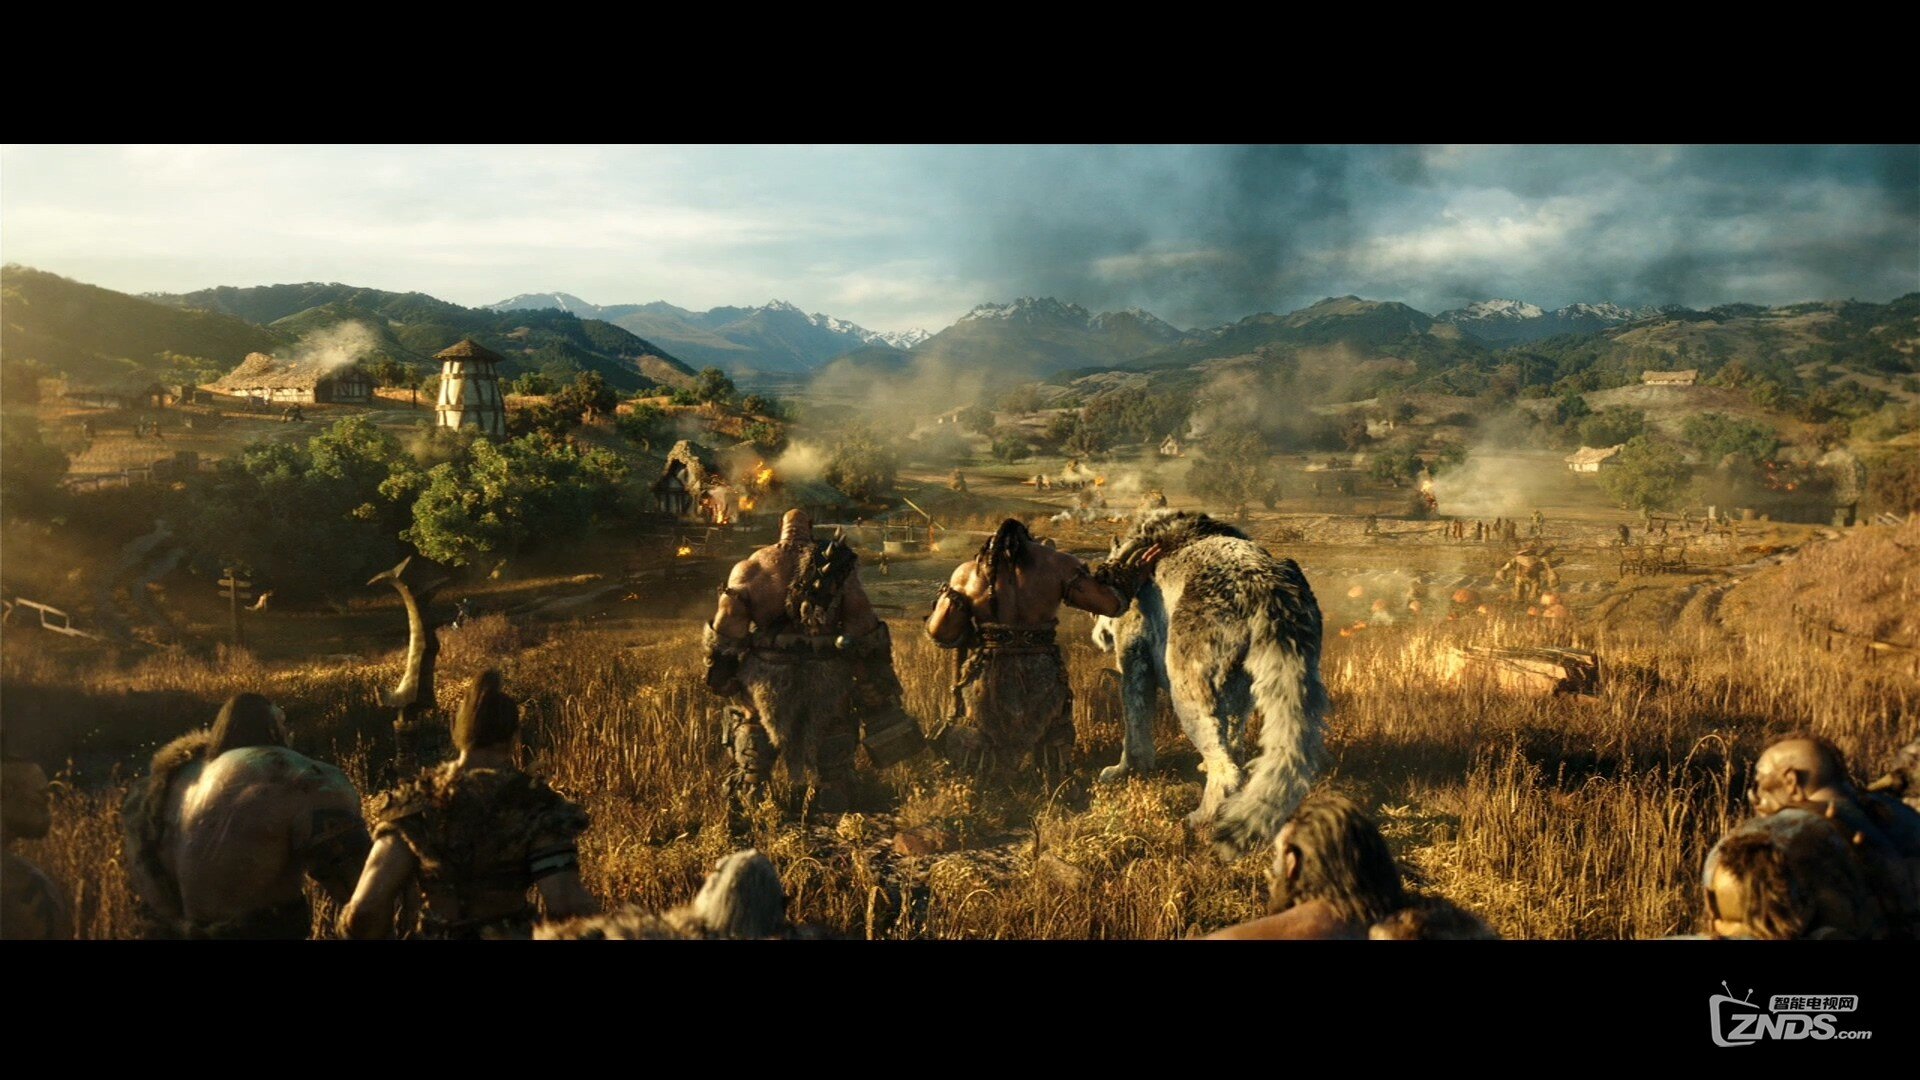 Warcraft_Trailer1_Texted_Stereo_PCM_1080p.mov_20160214_222640.109.jpg